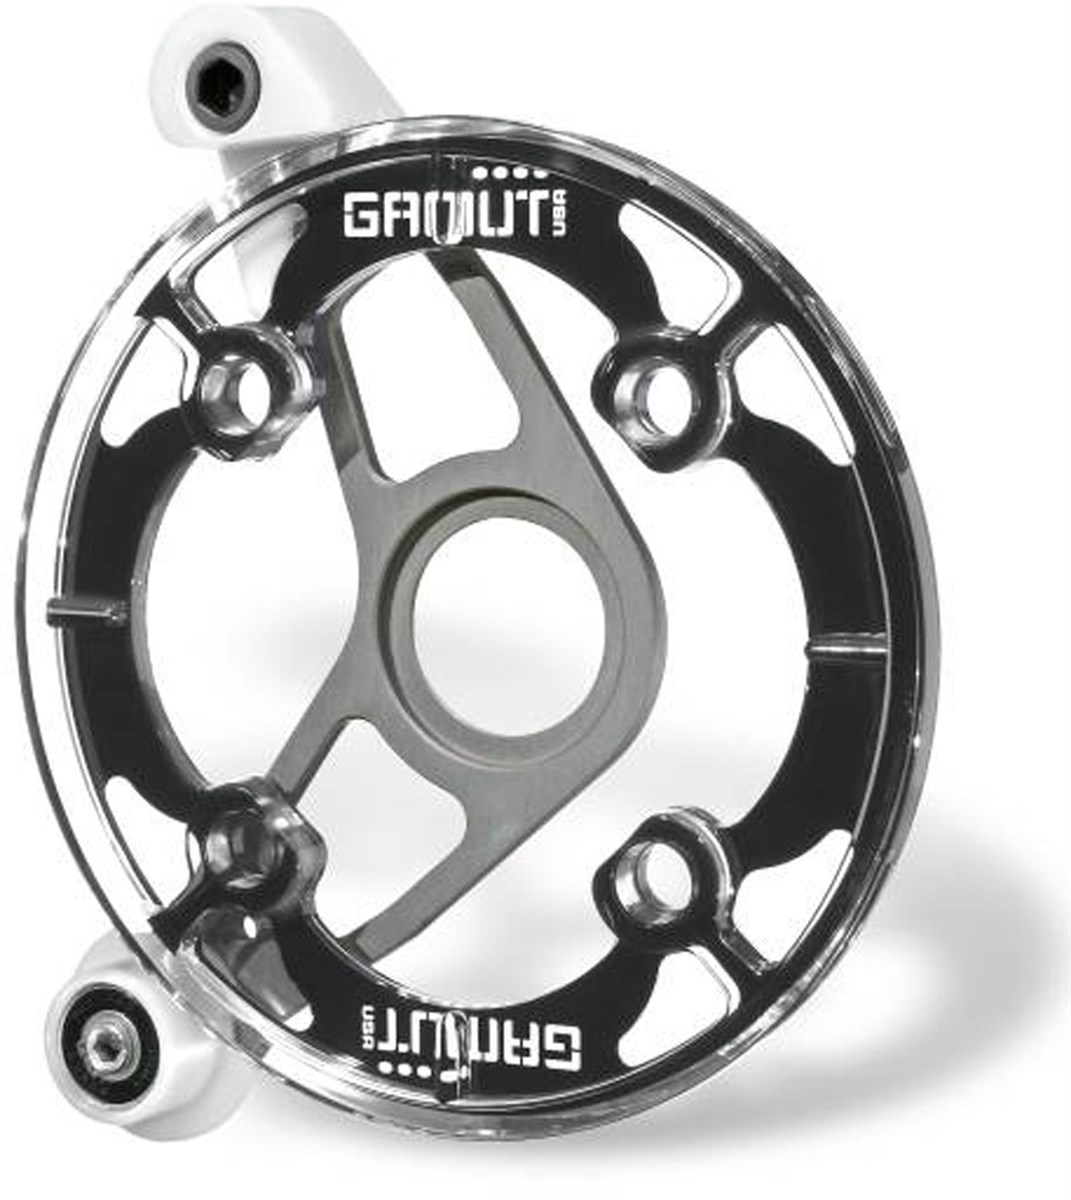 Gamut P30 ISCG Mount Chainguides product image